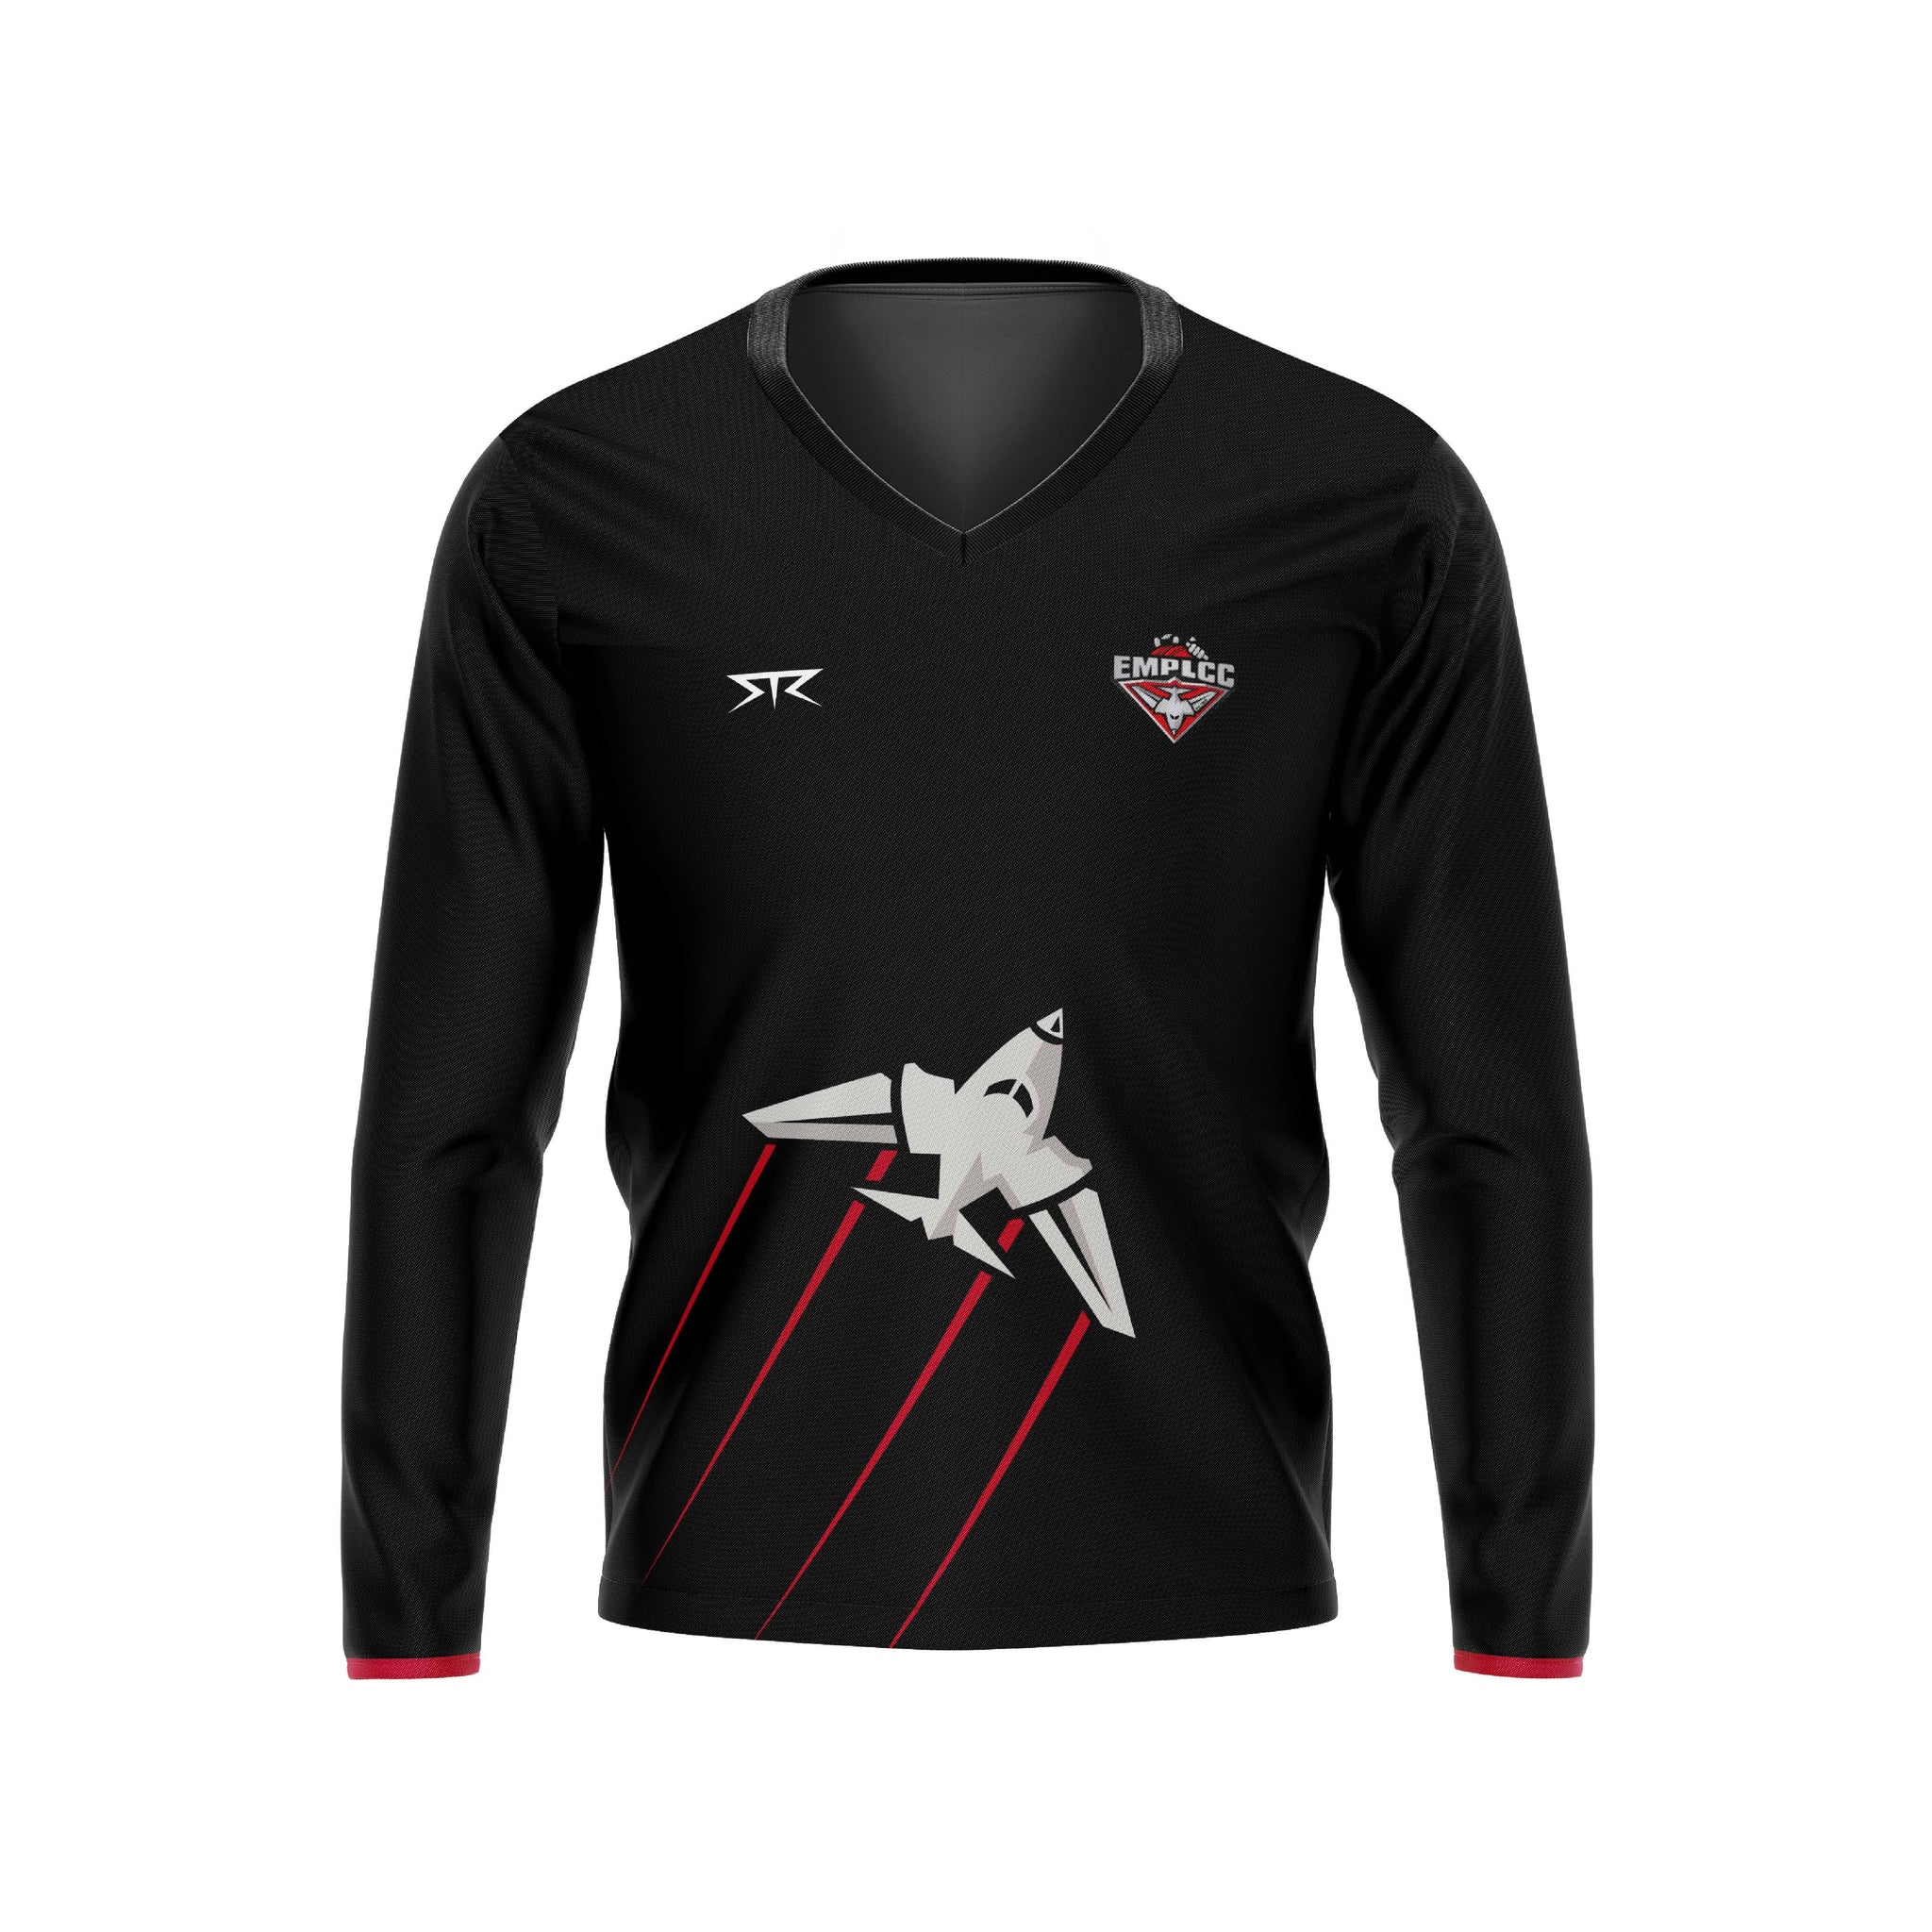 EMPLCC Long Sleeve Training Top